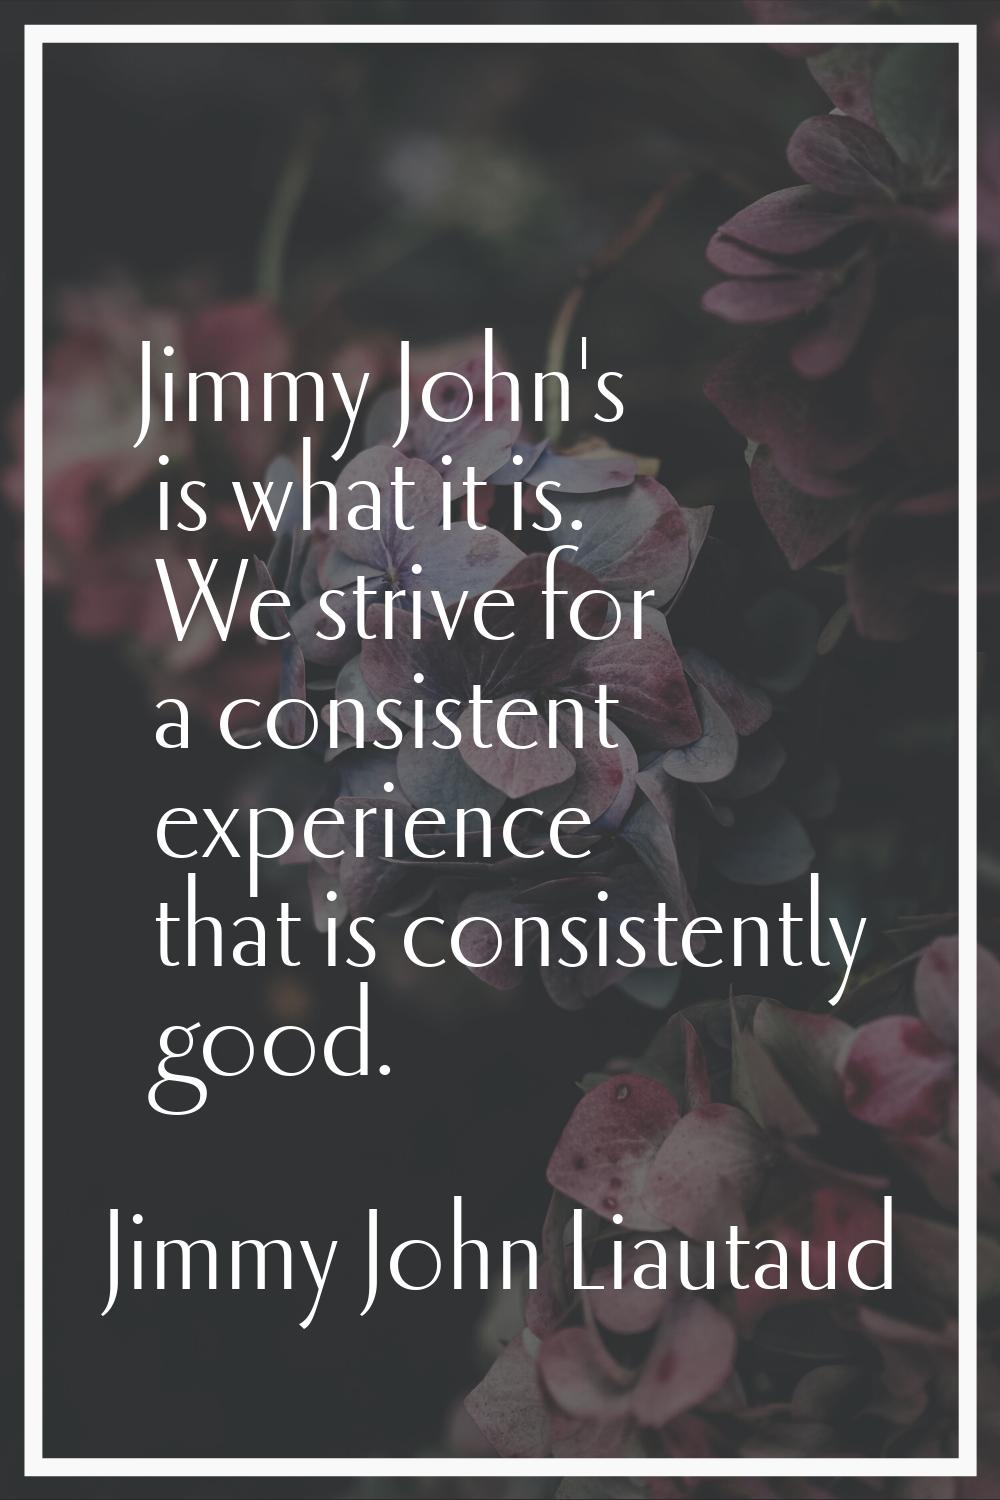 Jimmy John's is what it is. We strive for a consistent experience that is consistently good.